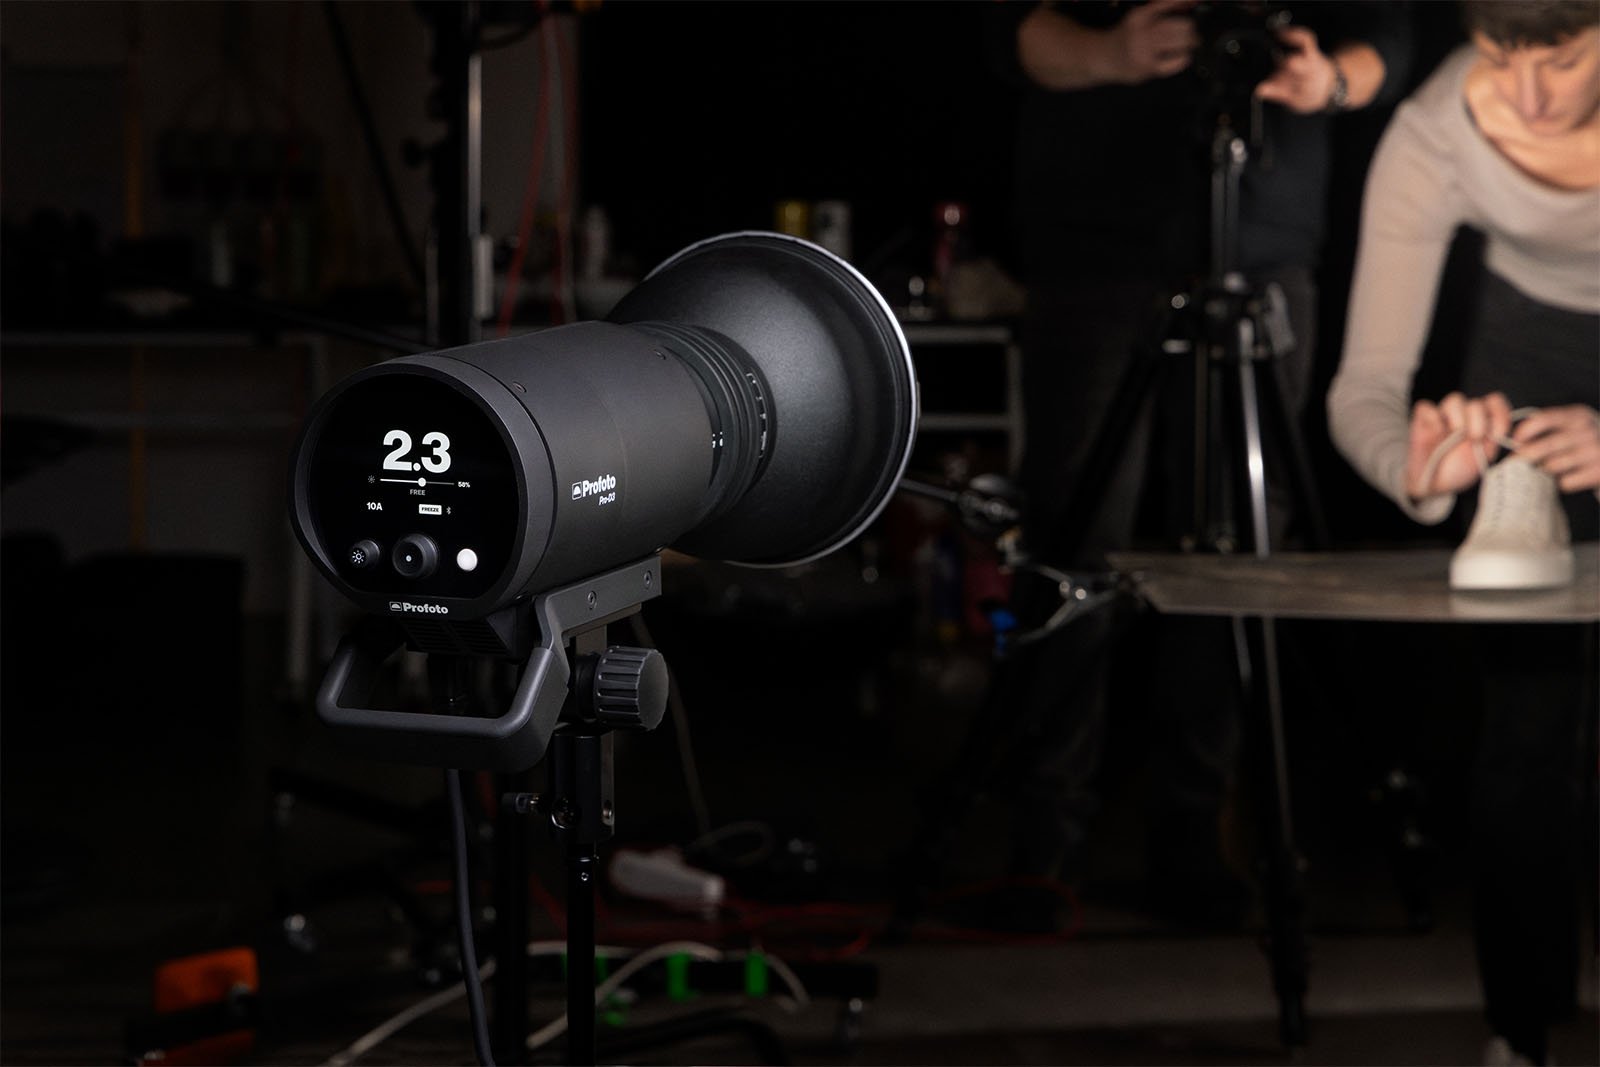 A professional studio setting showing a close-up of a profoto studio light with a digital display reading "2.3" and a photographer working with a model blurred in the background.